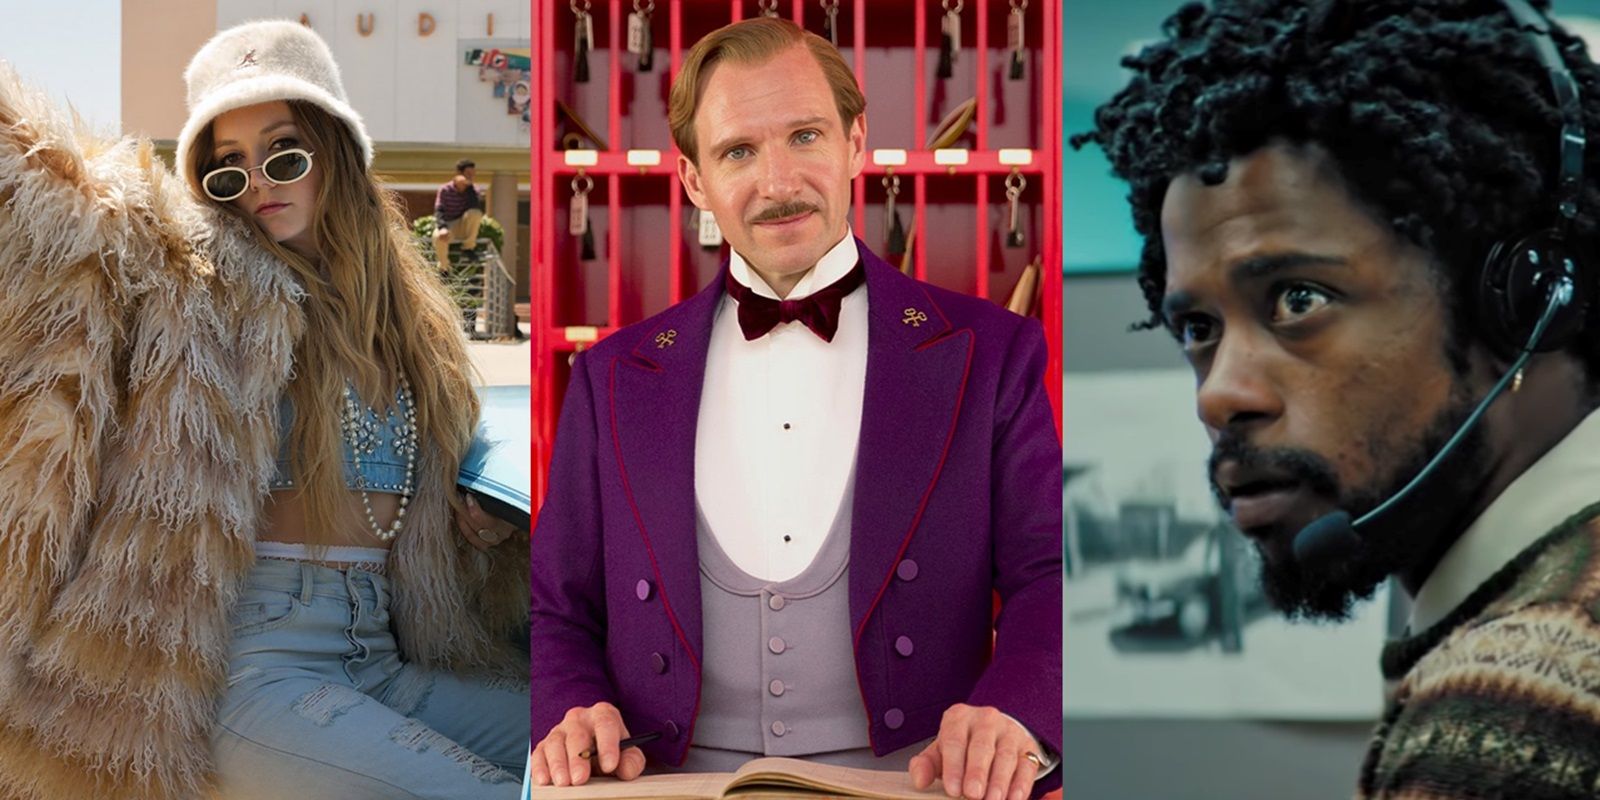 Gigi in Booksmart, Gustave H in The Grand Budapest Hotel, and Lakeith Stanfield in Sorry to Bother You